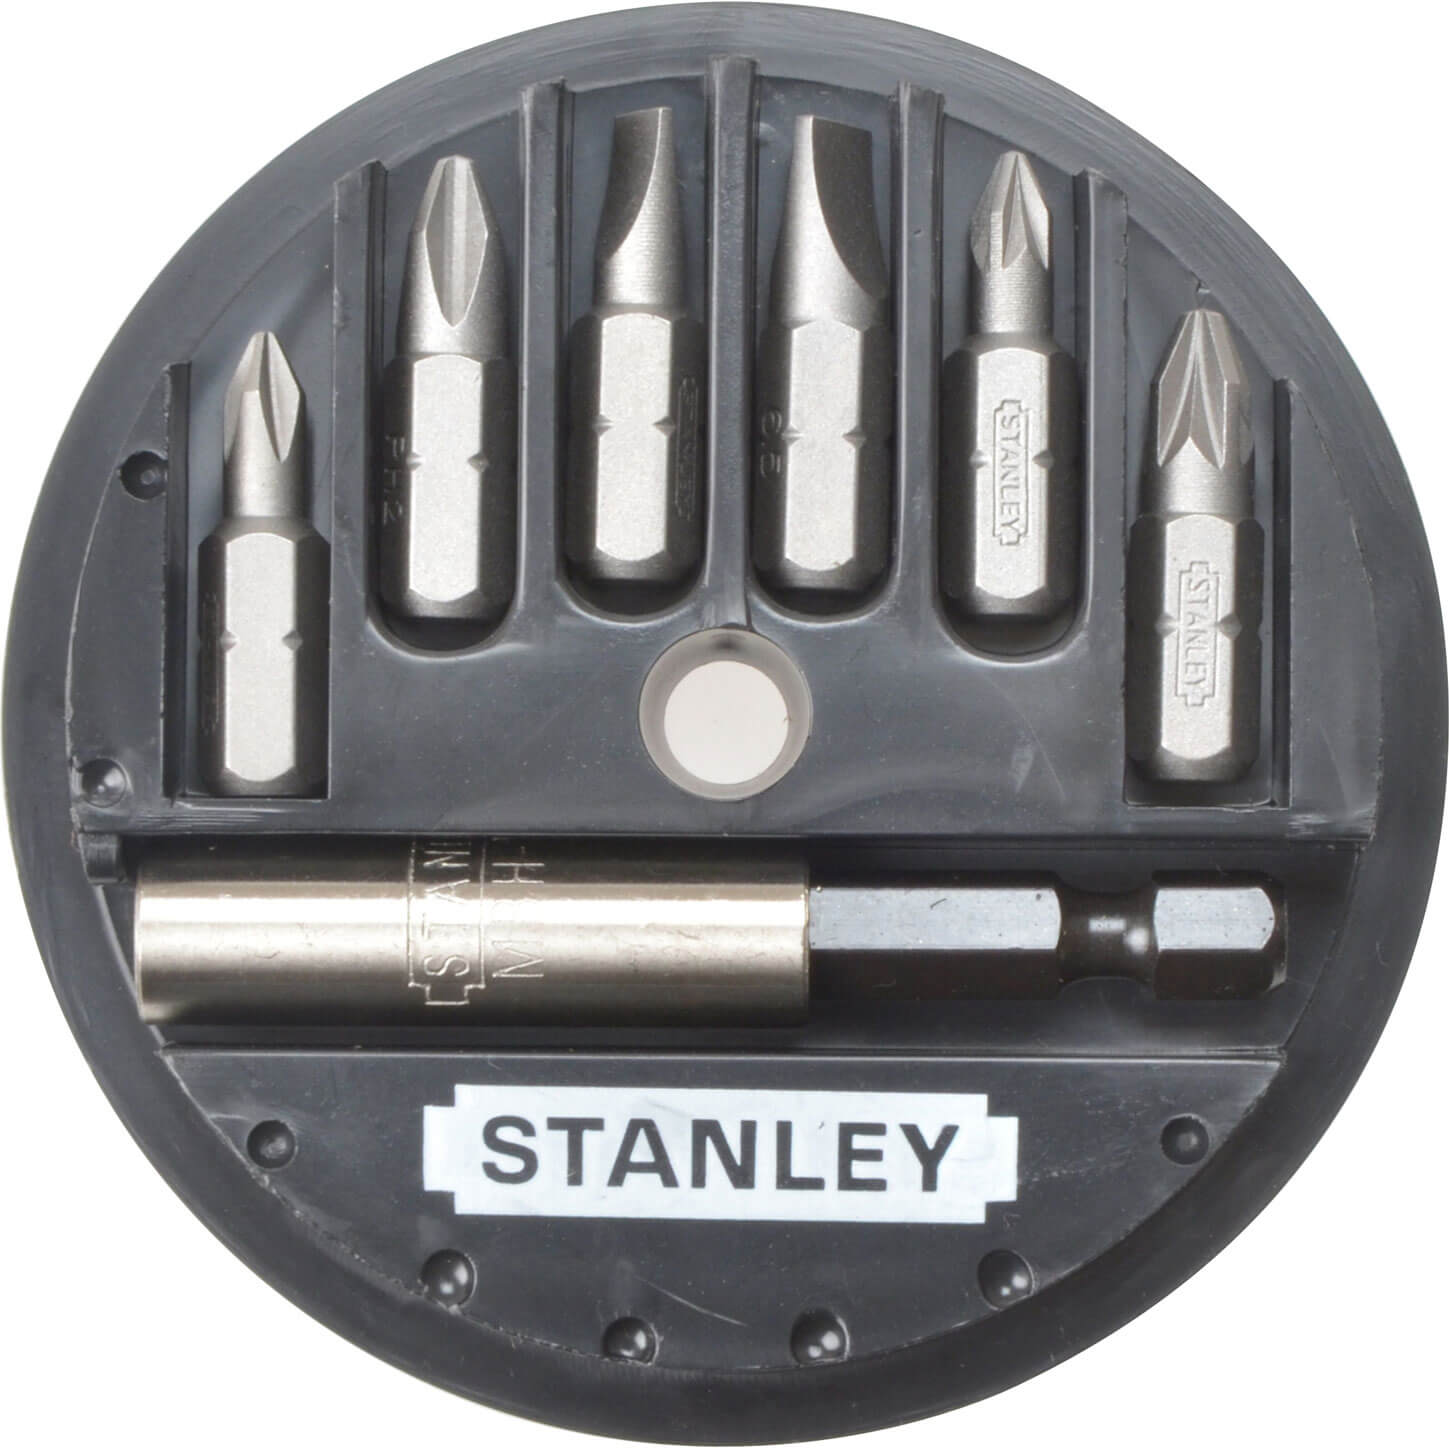 Image of Stanley 7 Piece Slotted, Phillips and Pozi Insert Screwdriver Bit Set